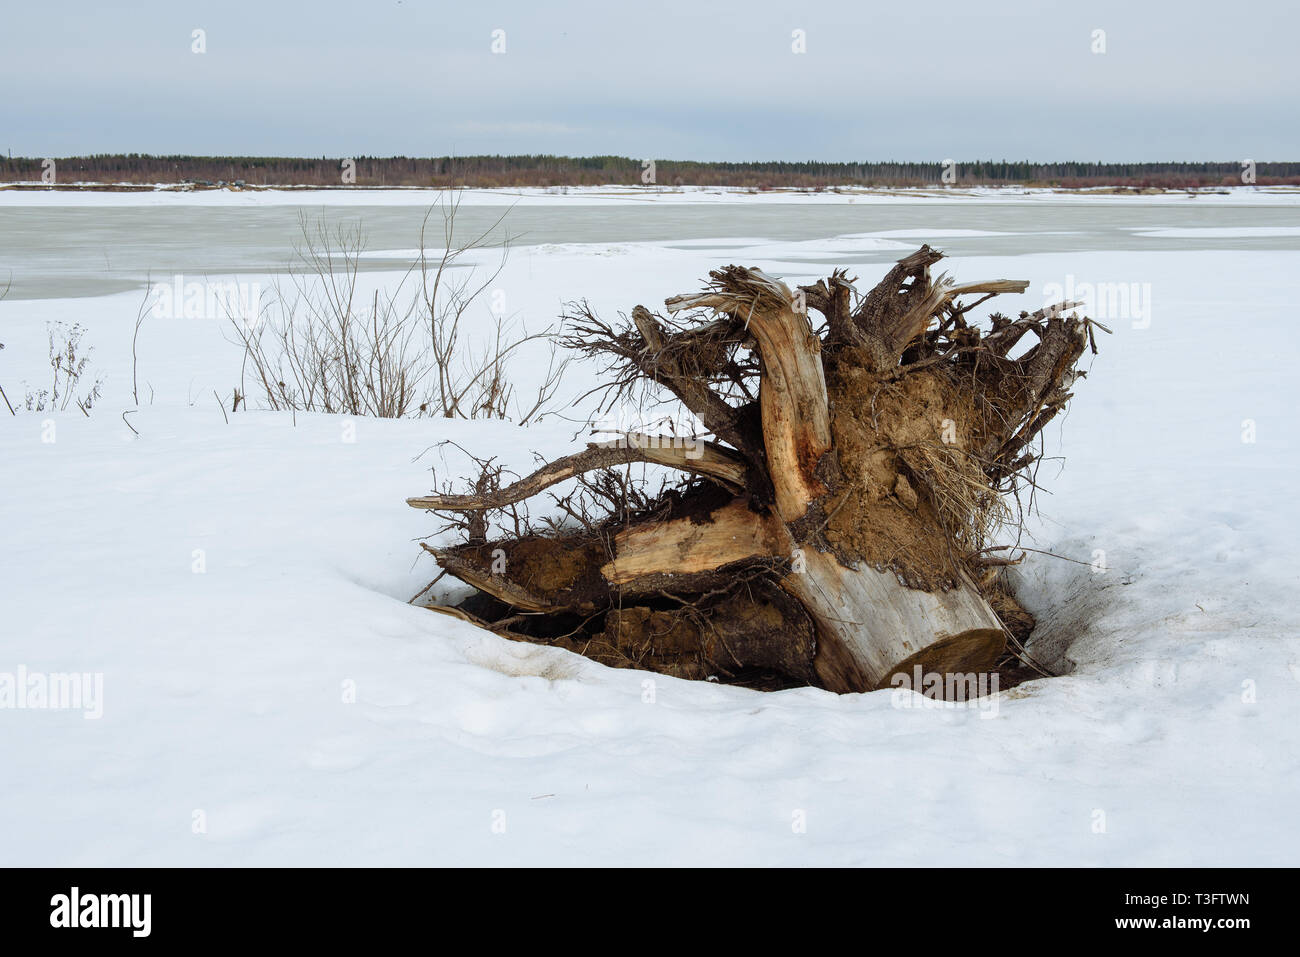 Pine root floated to the sandy shore during last year's flood on the river. The trunk was cut down by people for firewood and the root was not needed. Stock Photo